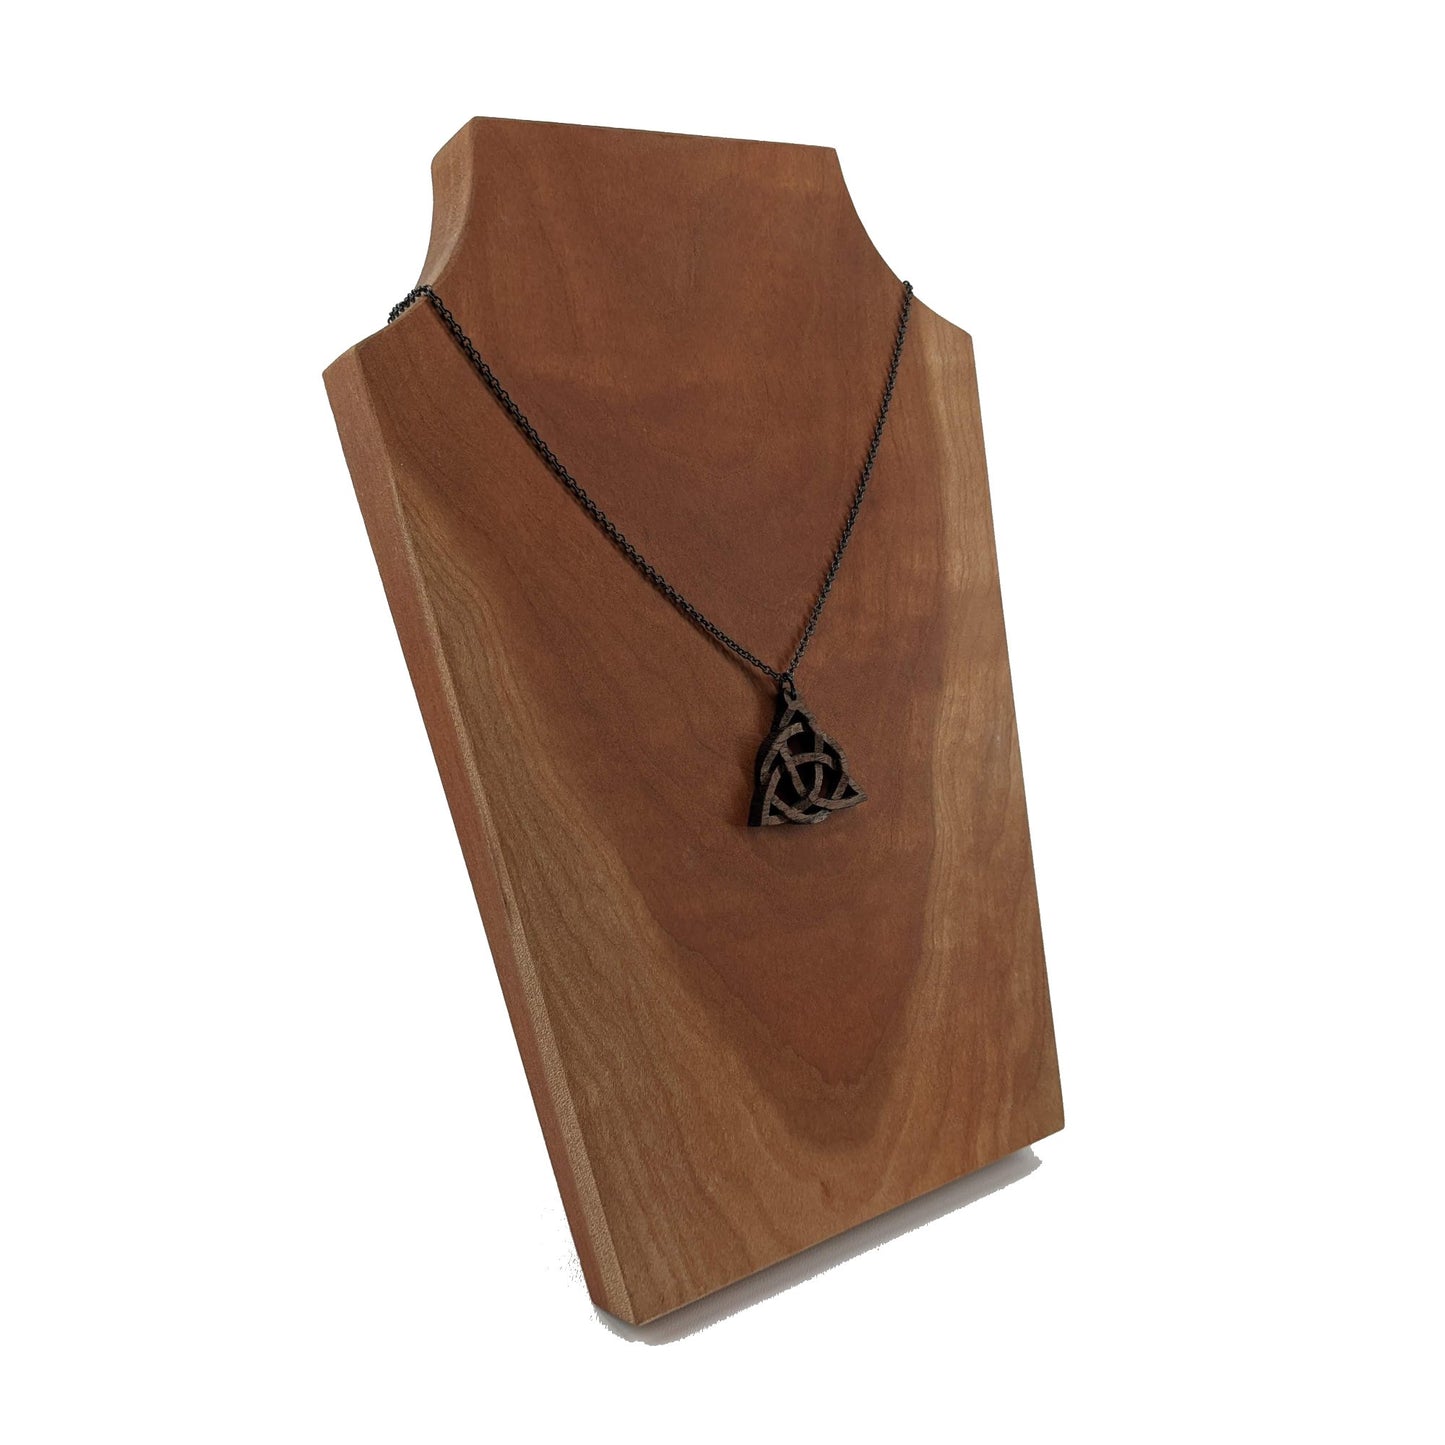 Wooden necklace pendant created in the style of a Celtic woven trinity symbol. Made from dark walnut. Hanging from a black stainless steel chain against a cherry wood background.